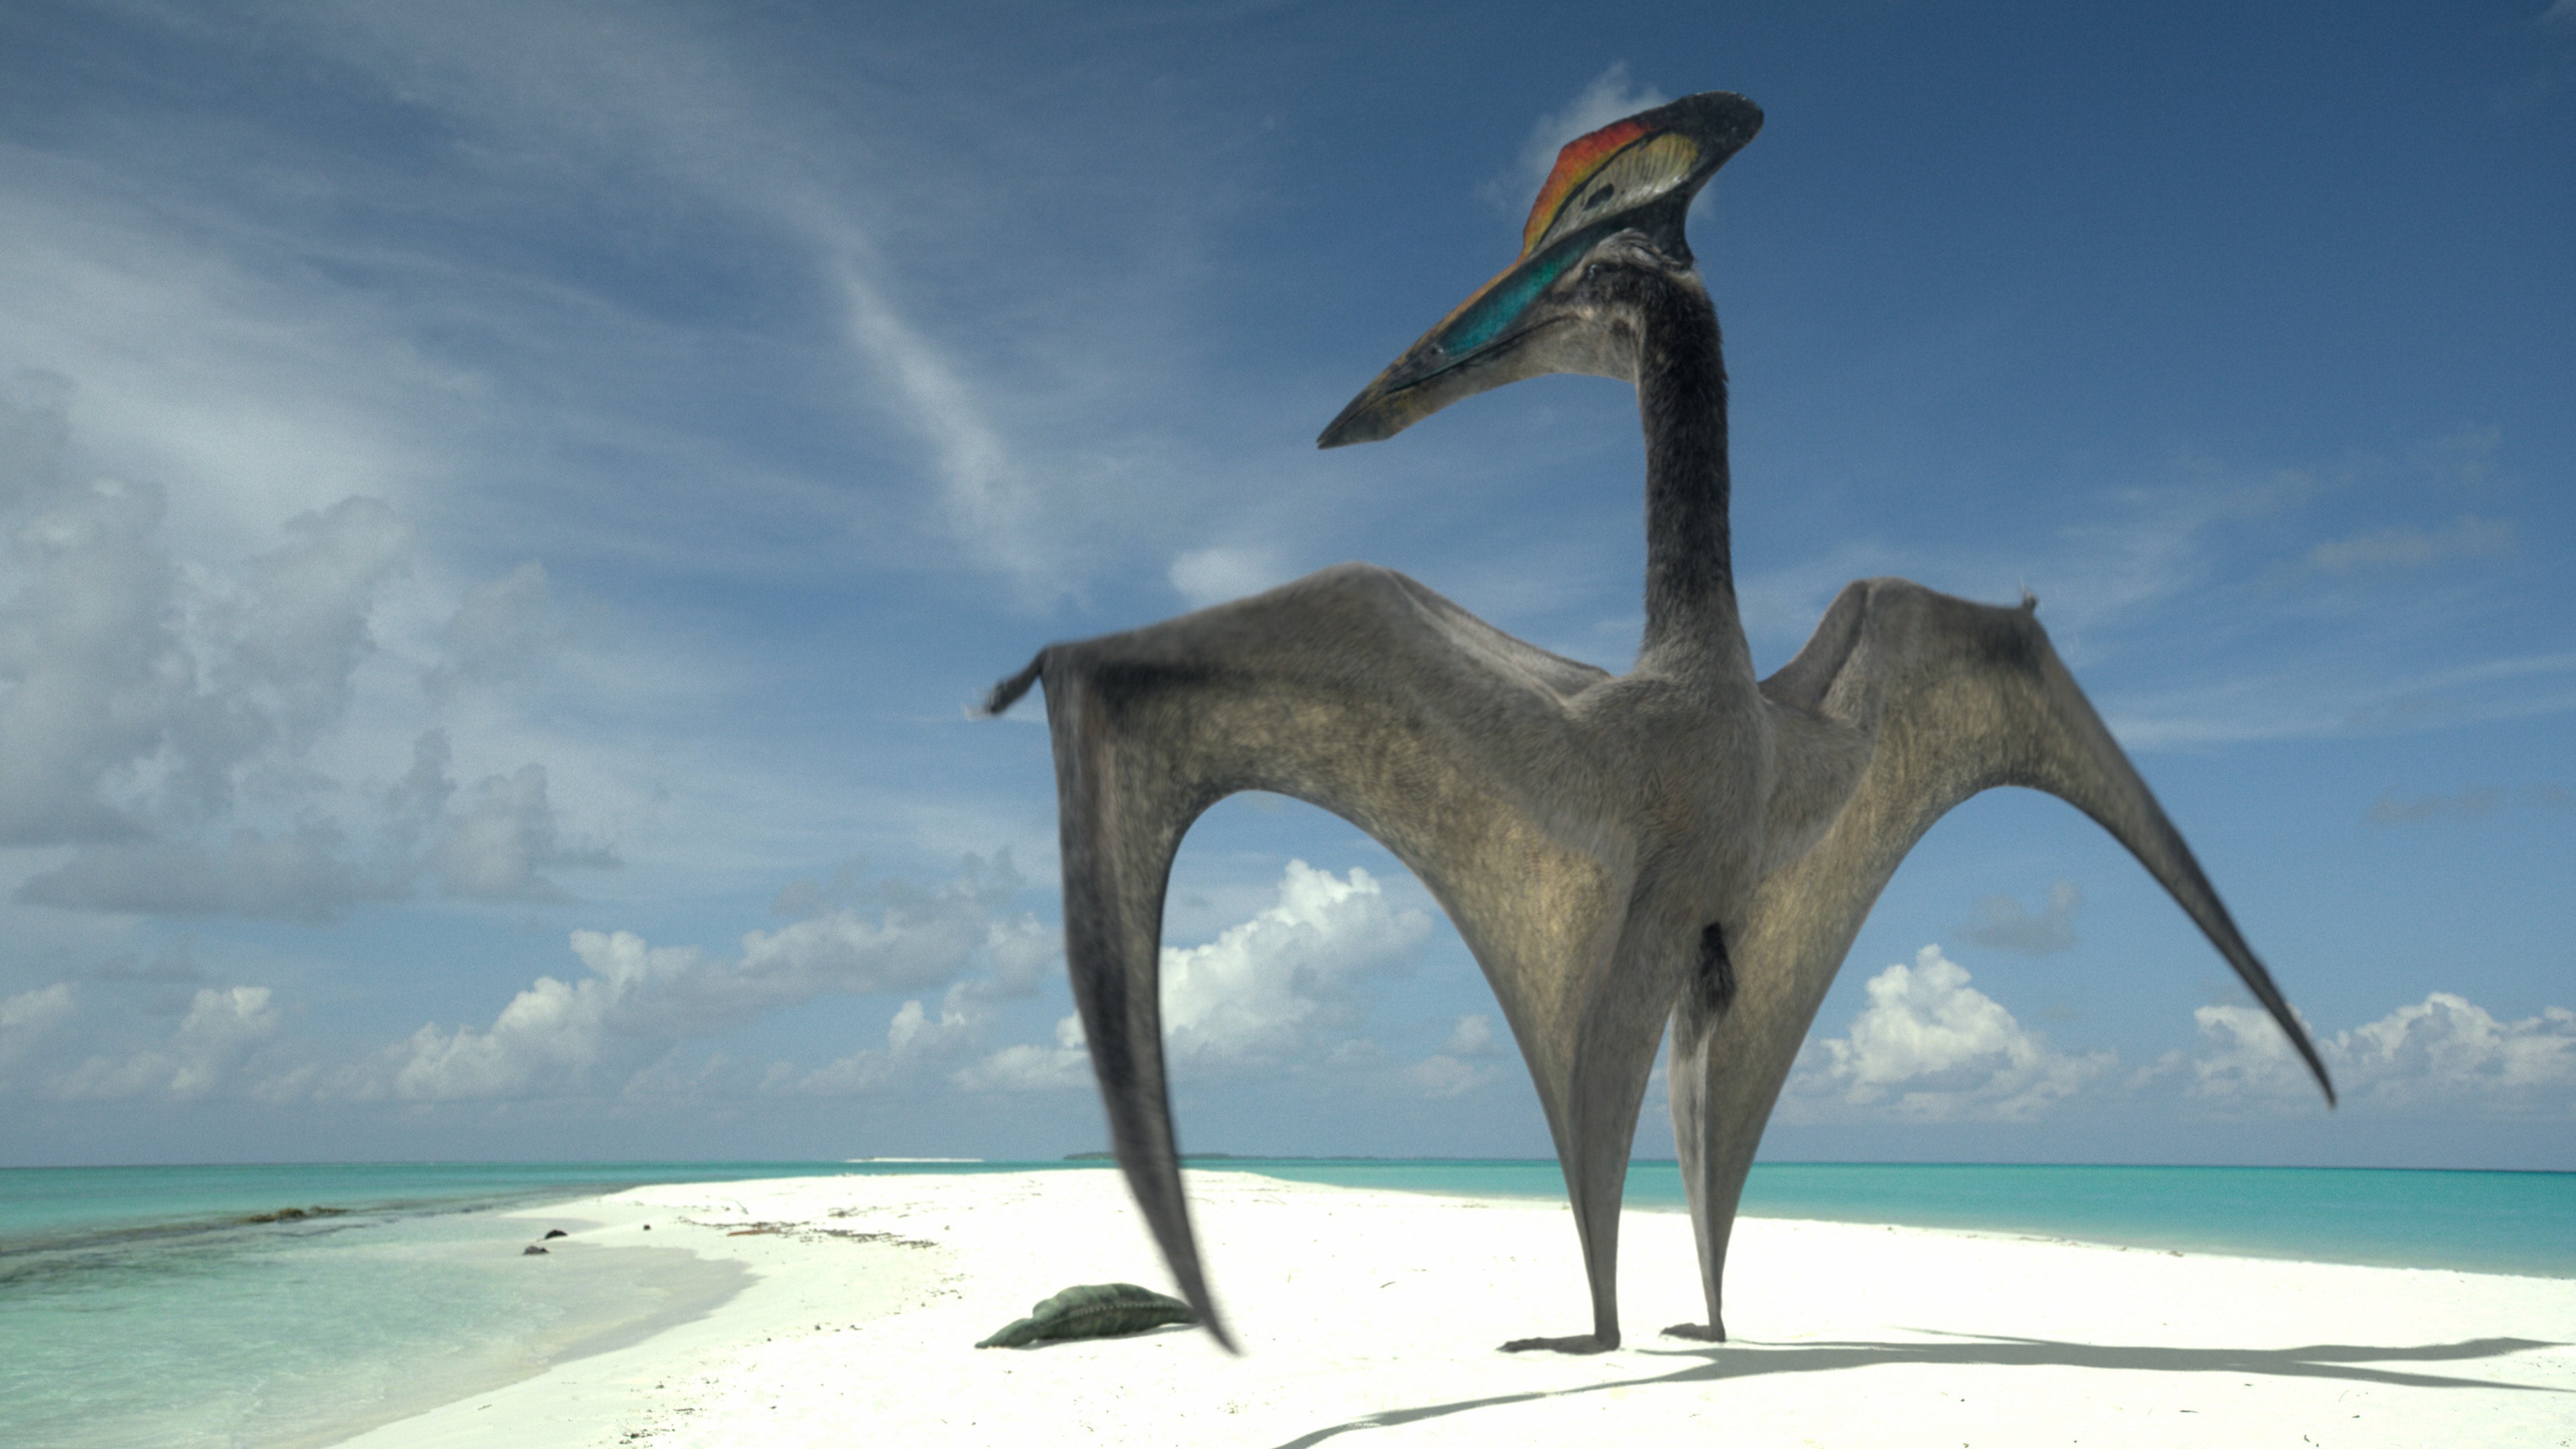 A male Hatzegopteryx presenting with a recently caught meal (on sandbar.) (Image: Apple TV+)